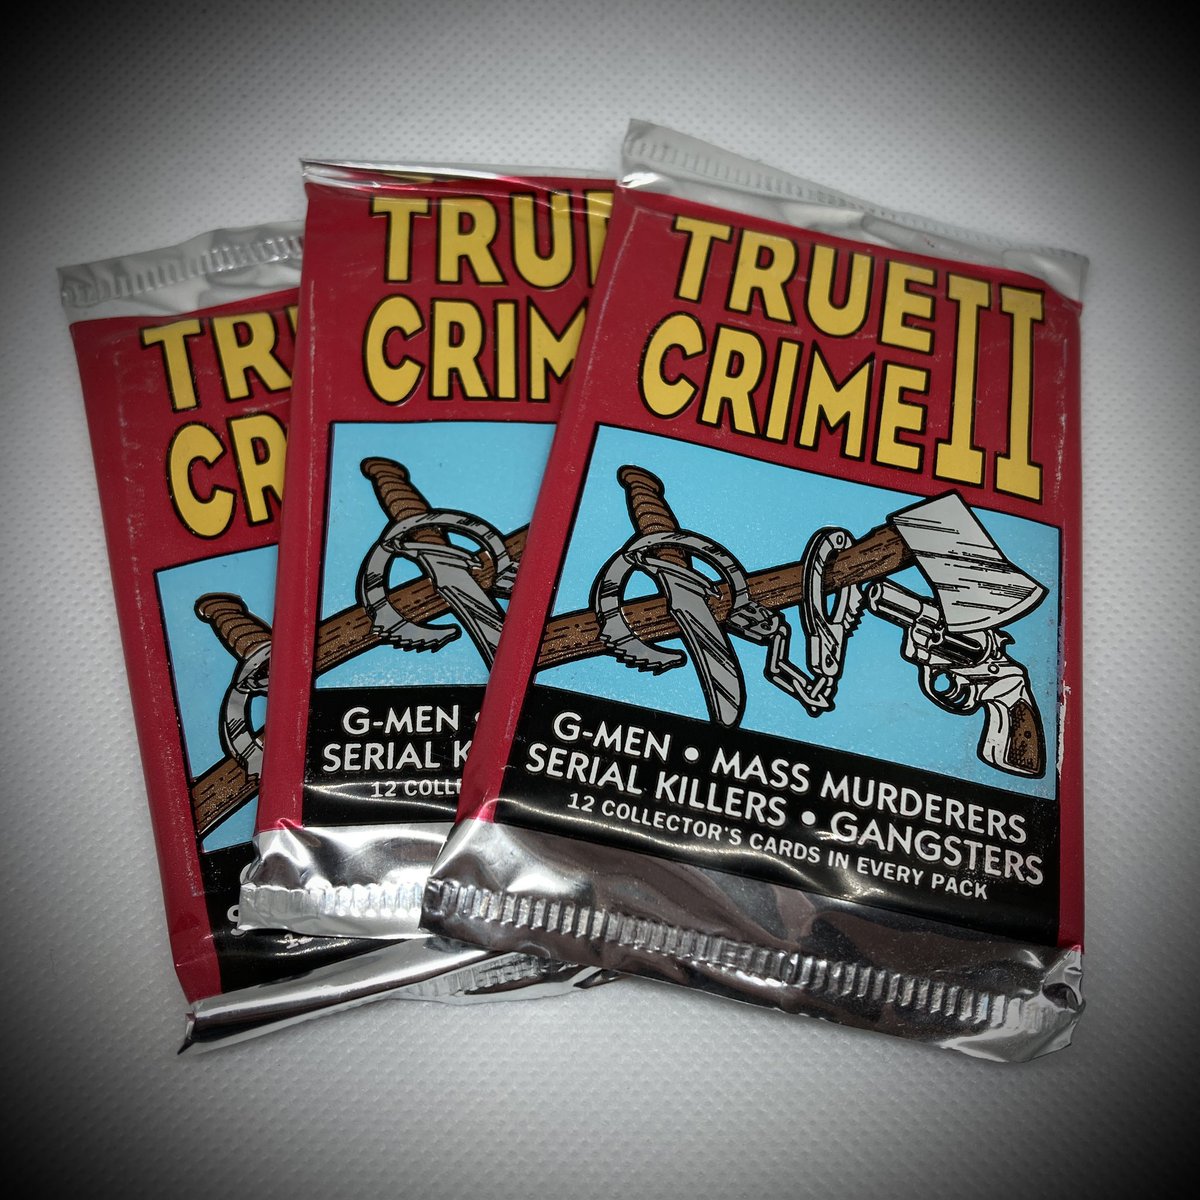 I couldn't buy packs from the first set and not order some from the second set as well! Can't wait to dig into these #TrueCrime cards! Who should I look for? #gmen #murderers #serialkillers